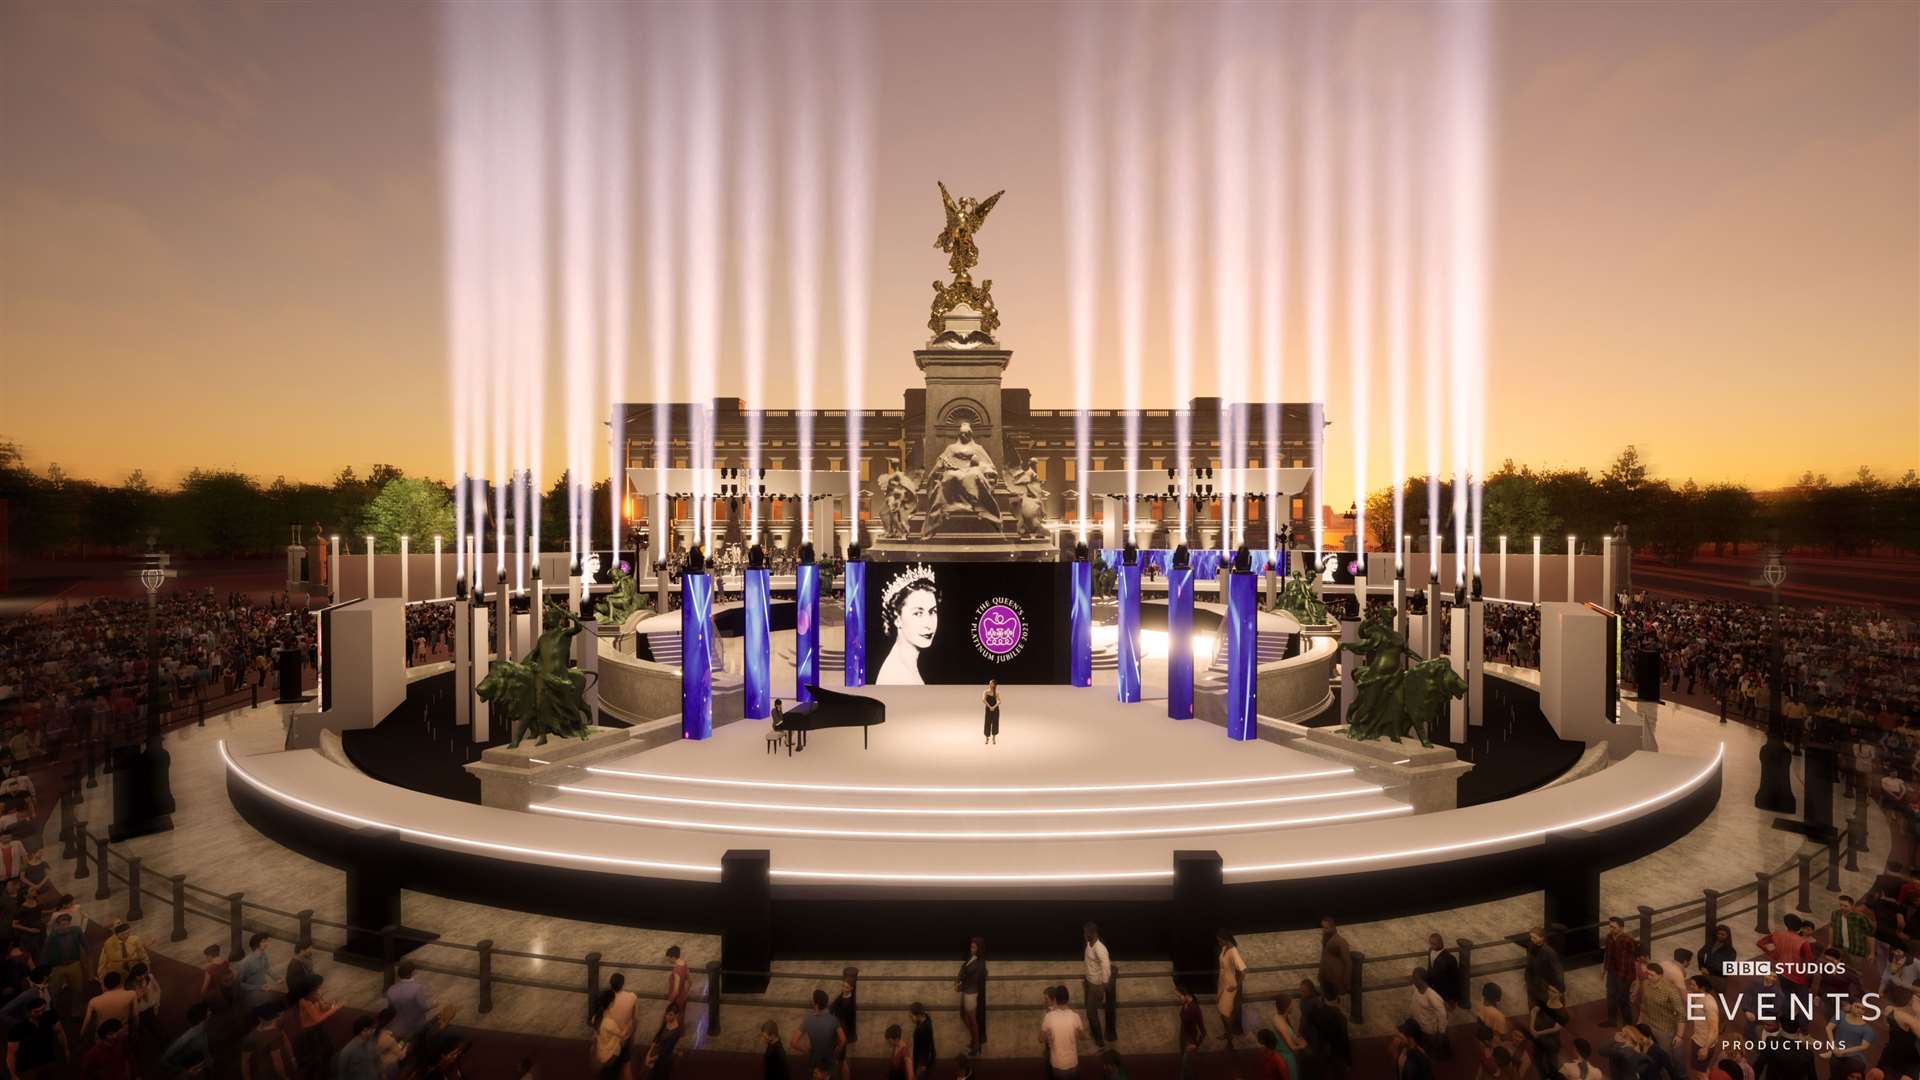 An artist’s impression of the stages outside Buckingham Palace for the Platinum Party at the Palace (BBC/PA)